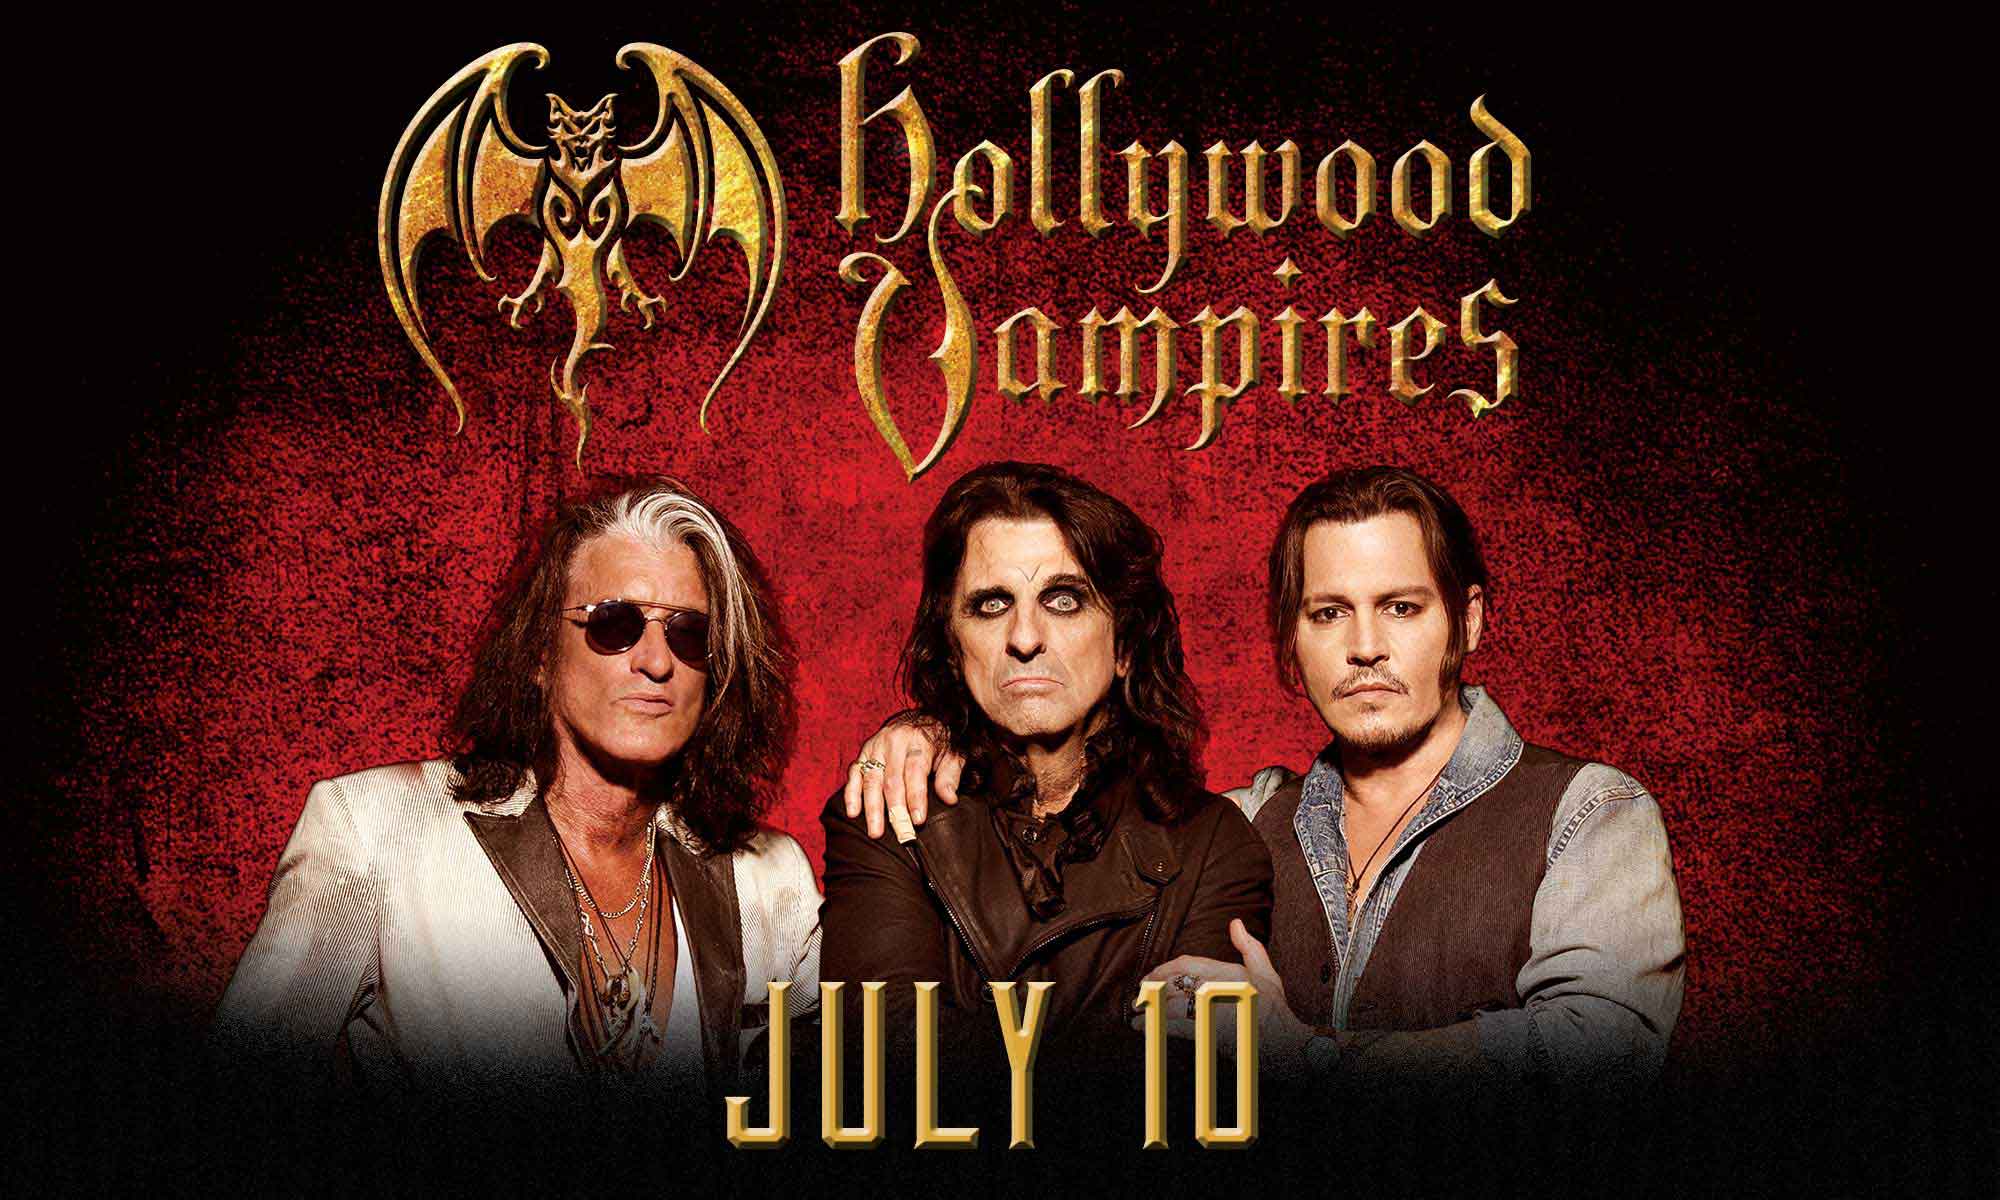 Hollywood Vampires at Coney Island Amphitheater on 07-10-16